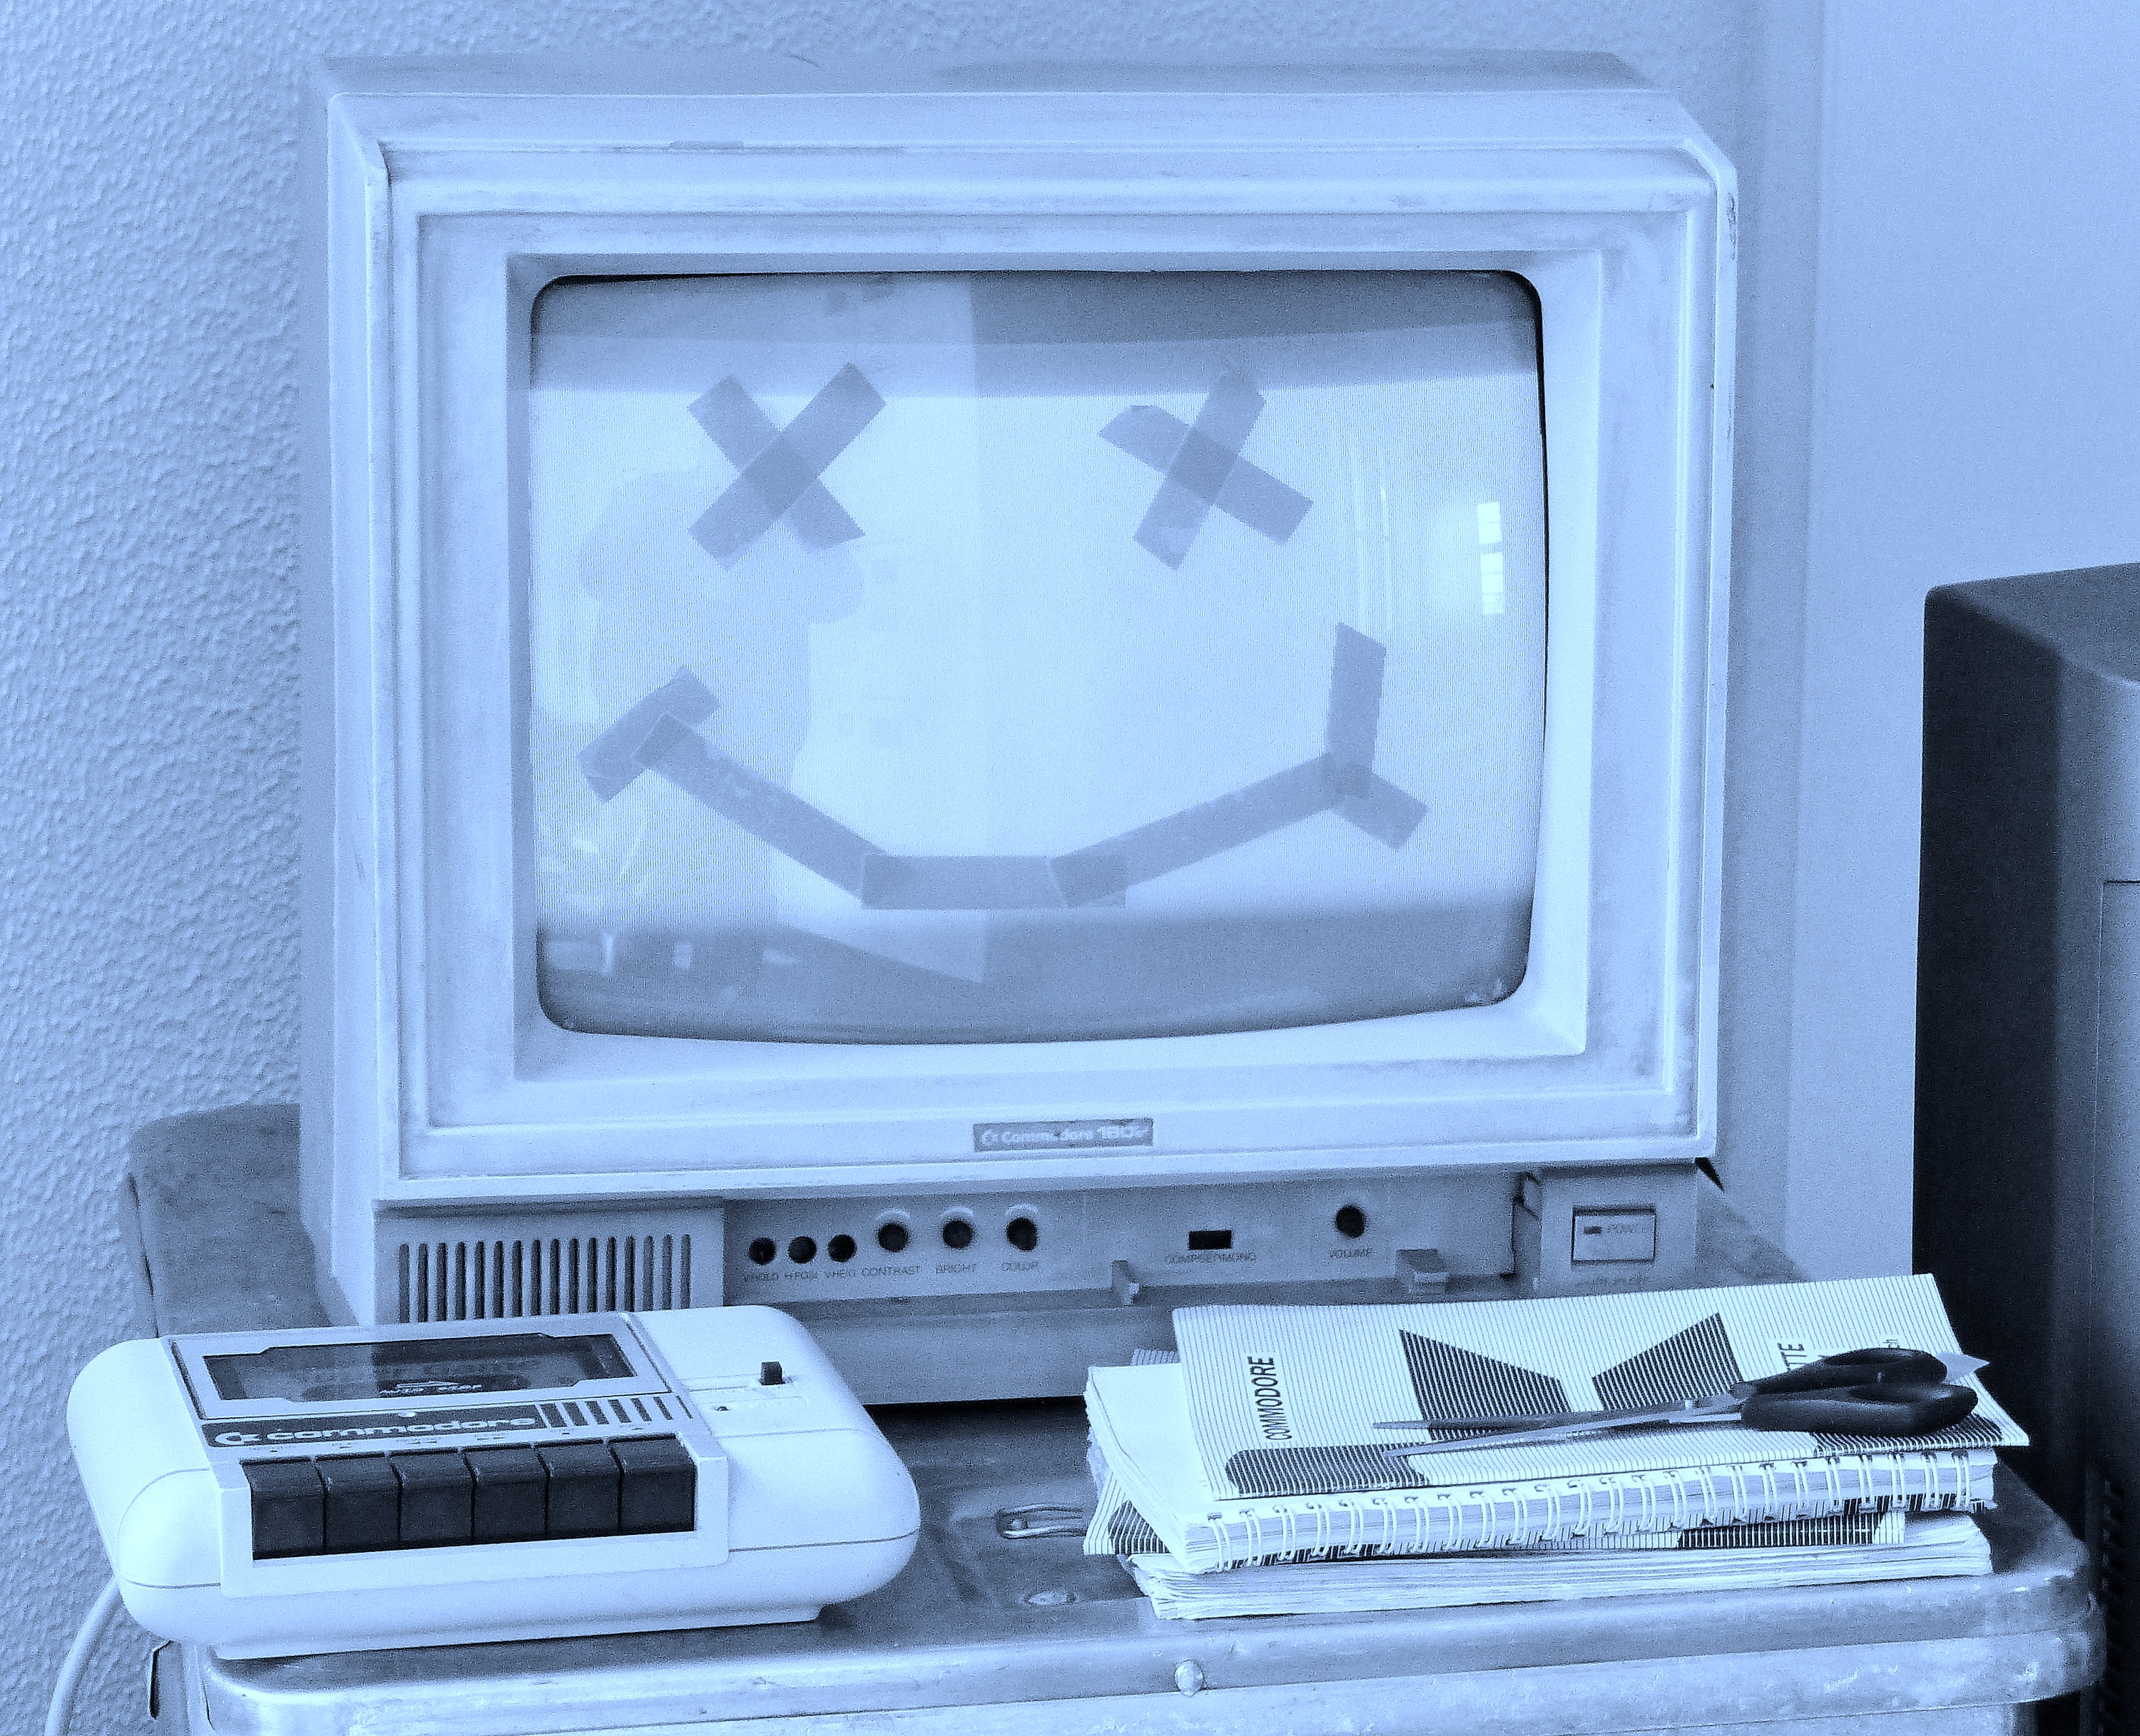 An old computer with a smiley face drawn in masking tape over the screen. An old tape recorder, a few notebooks, and a pair of scissors sit on a desk.